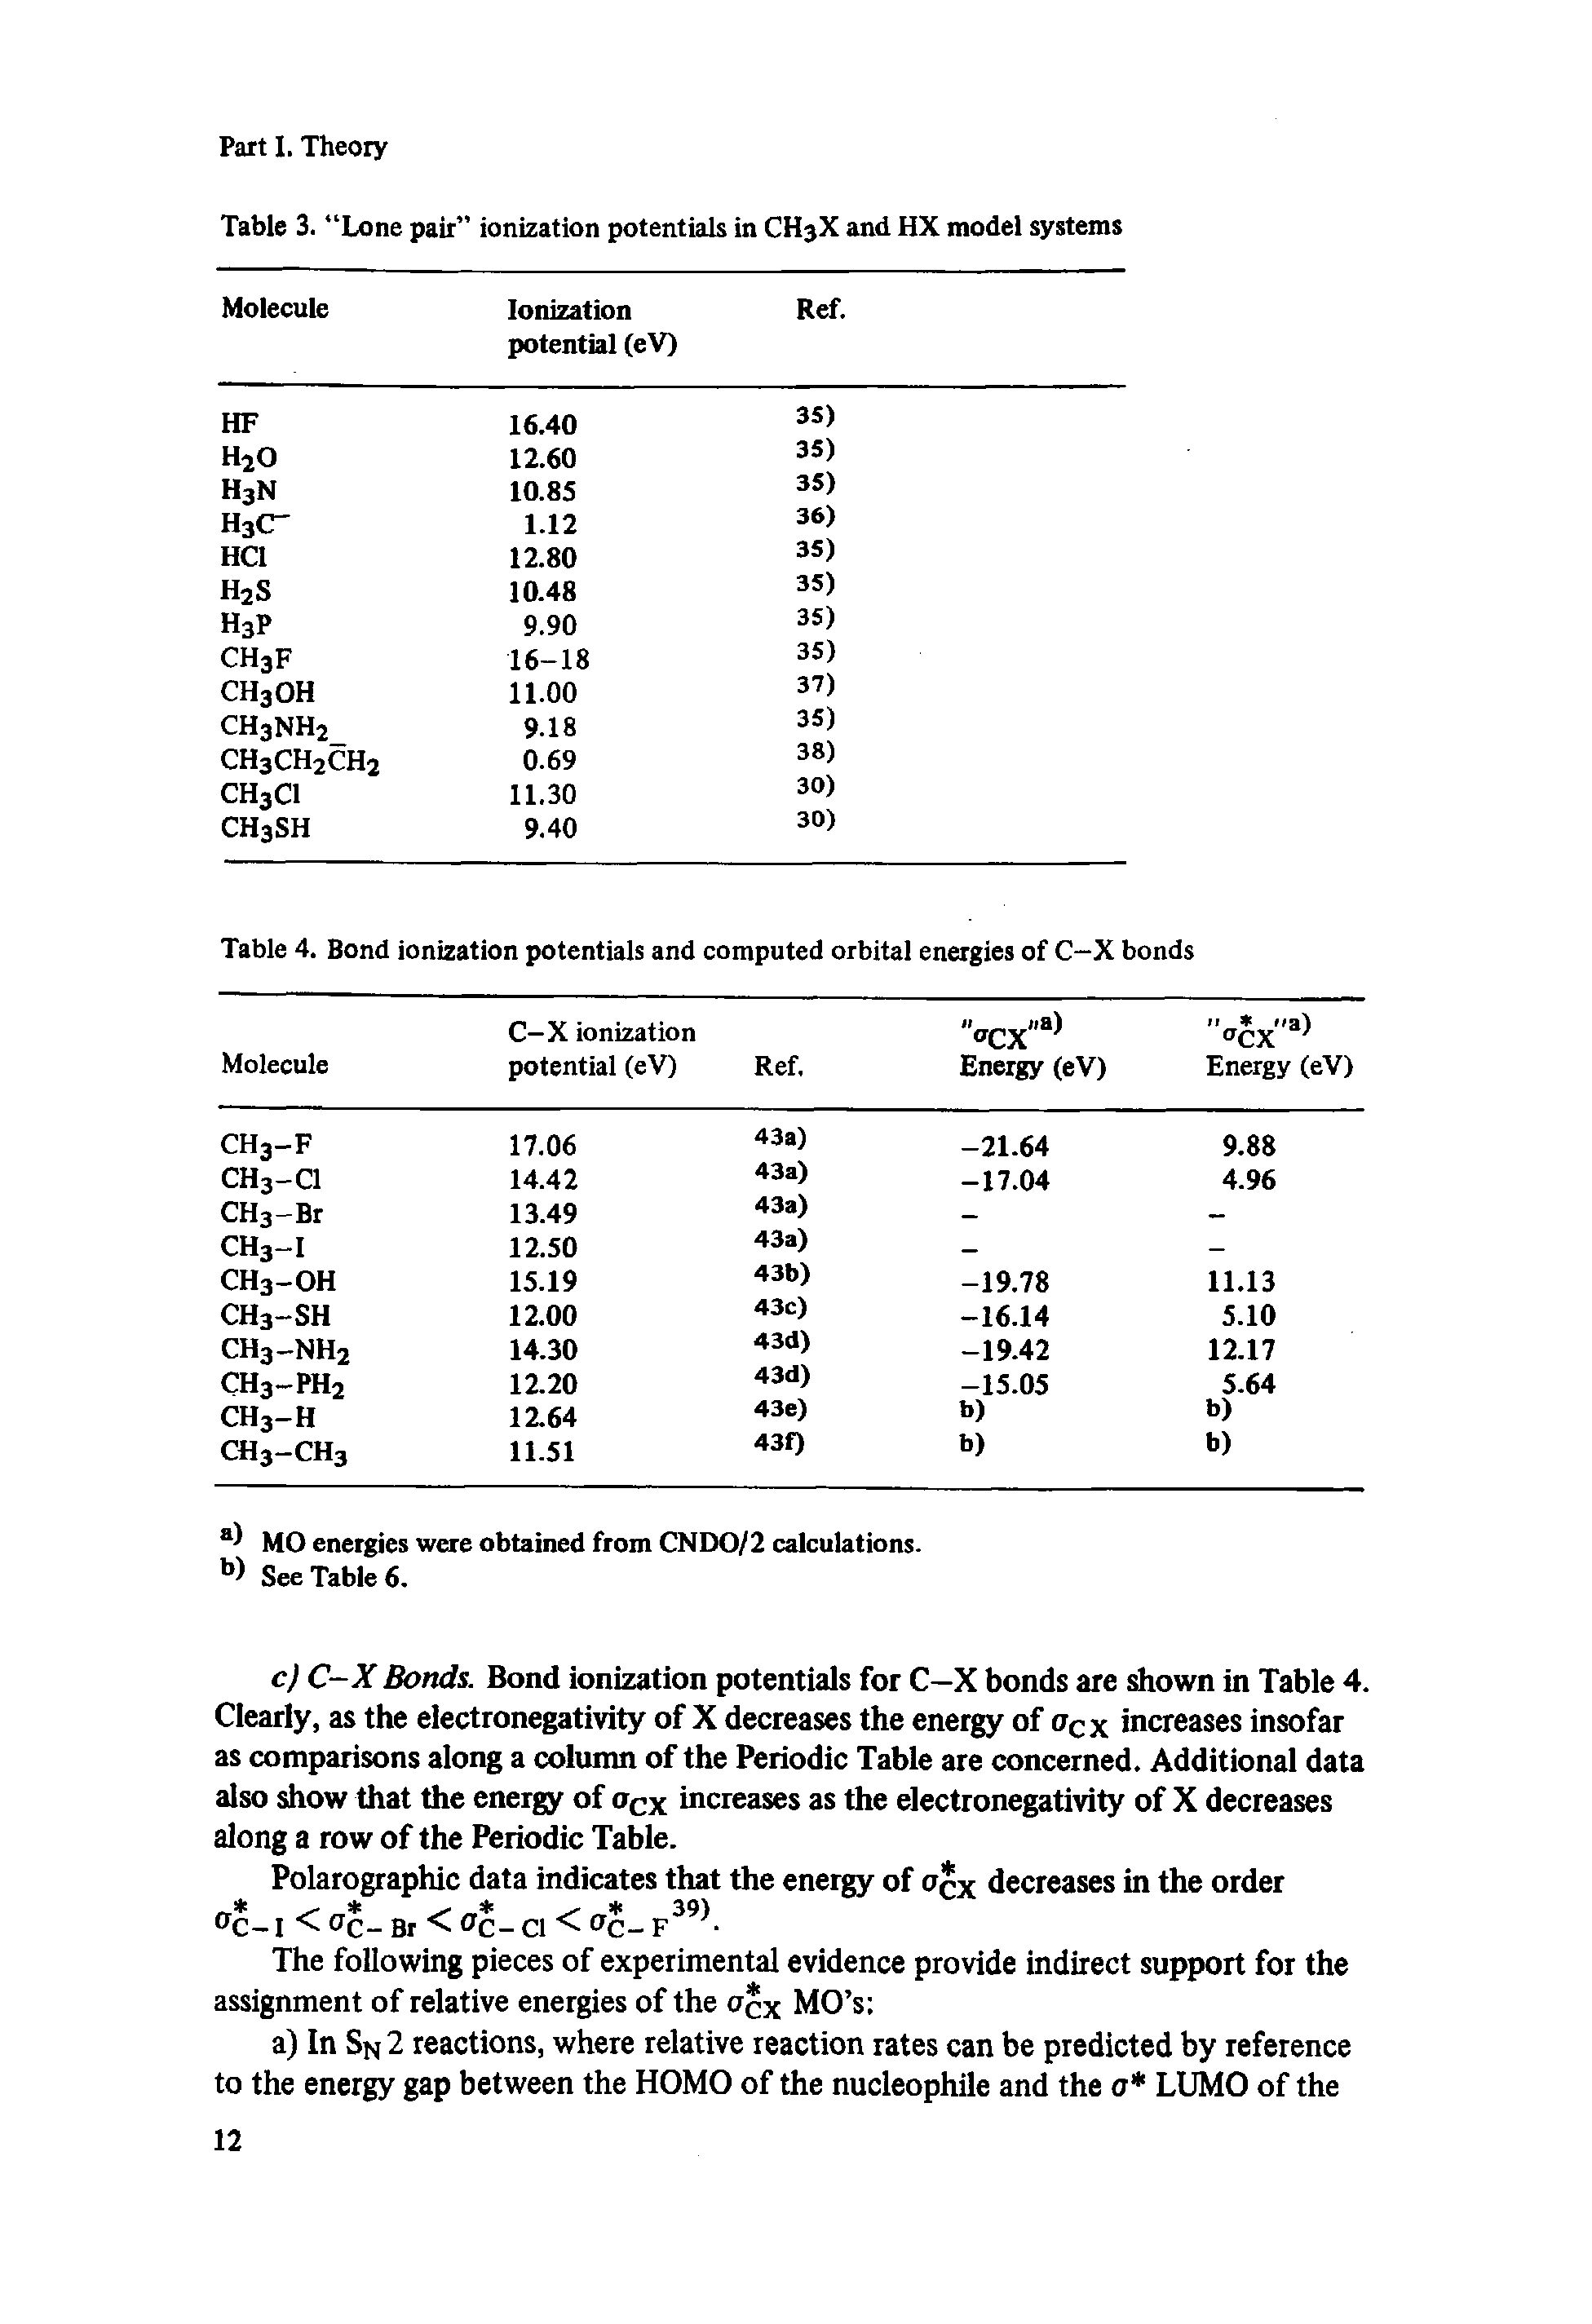 Table 4. Bond ionization potentials and computed orbital energies of C-X bonds...